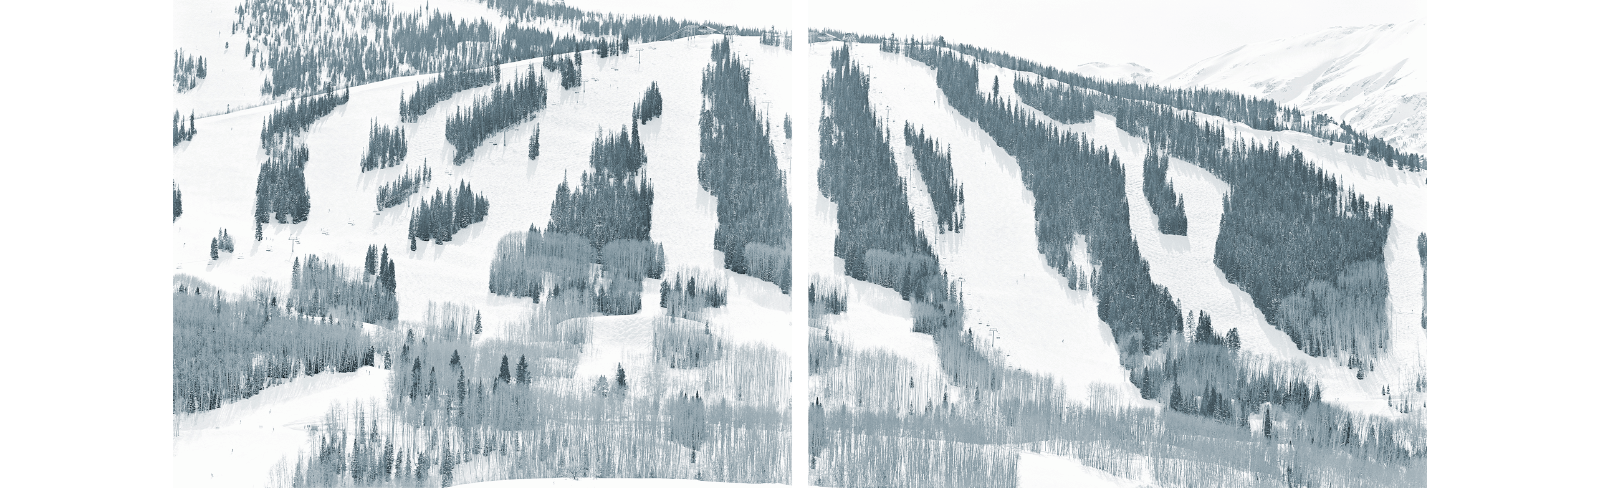 a ski slope with trees and snow